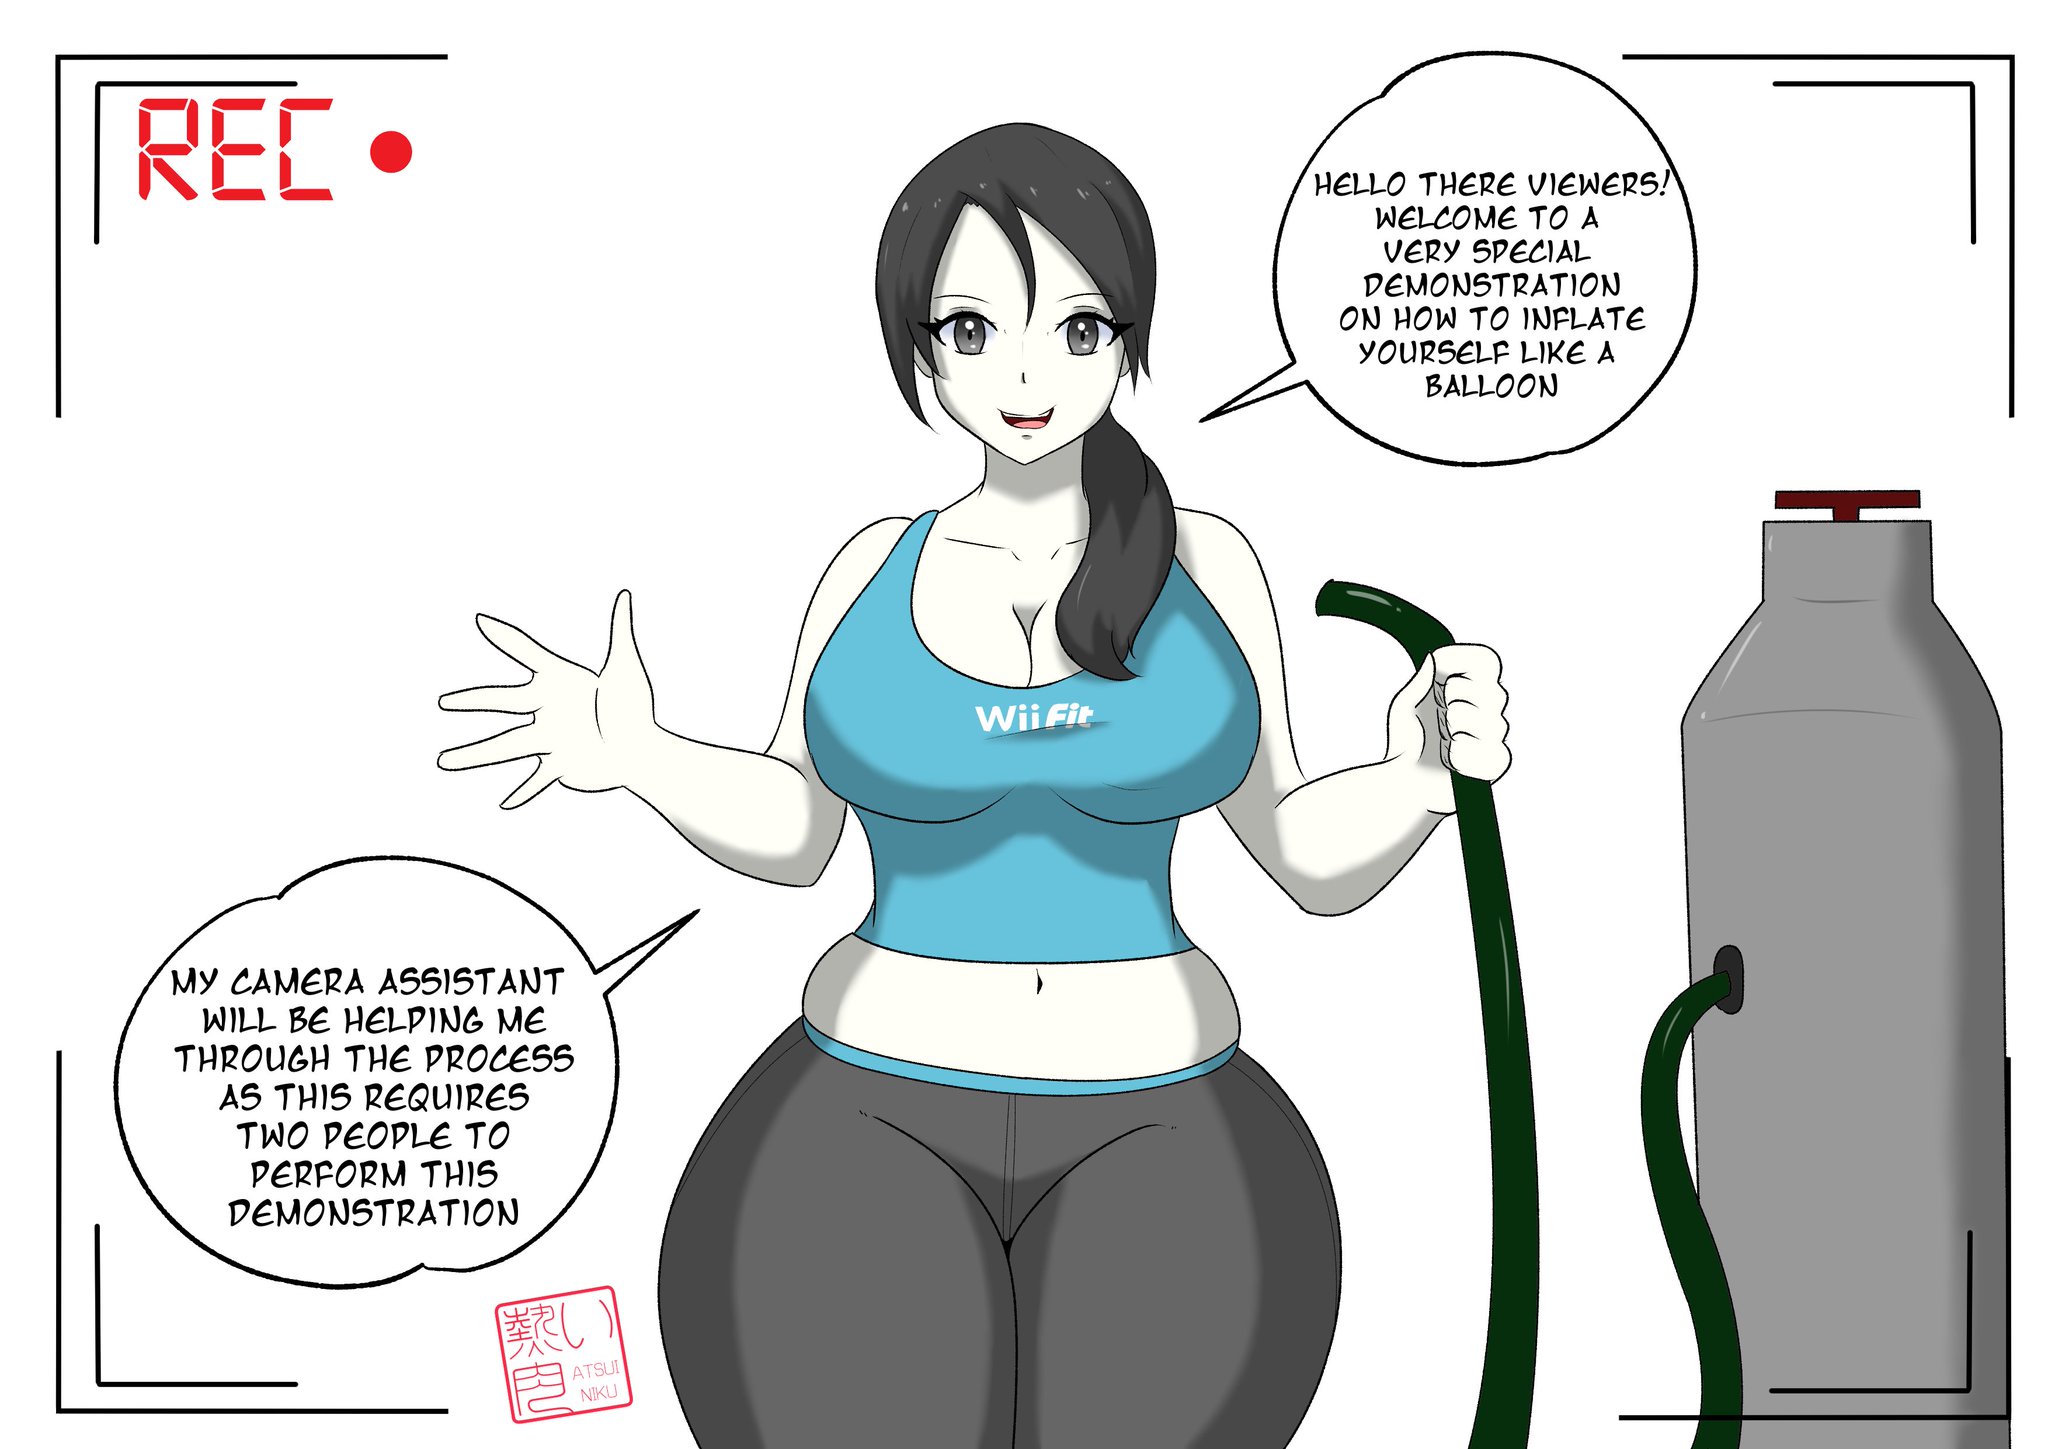 “#commission for @Prinny1291 The Wii Fit Trainer demonstrates to the viewer...